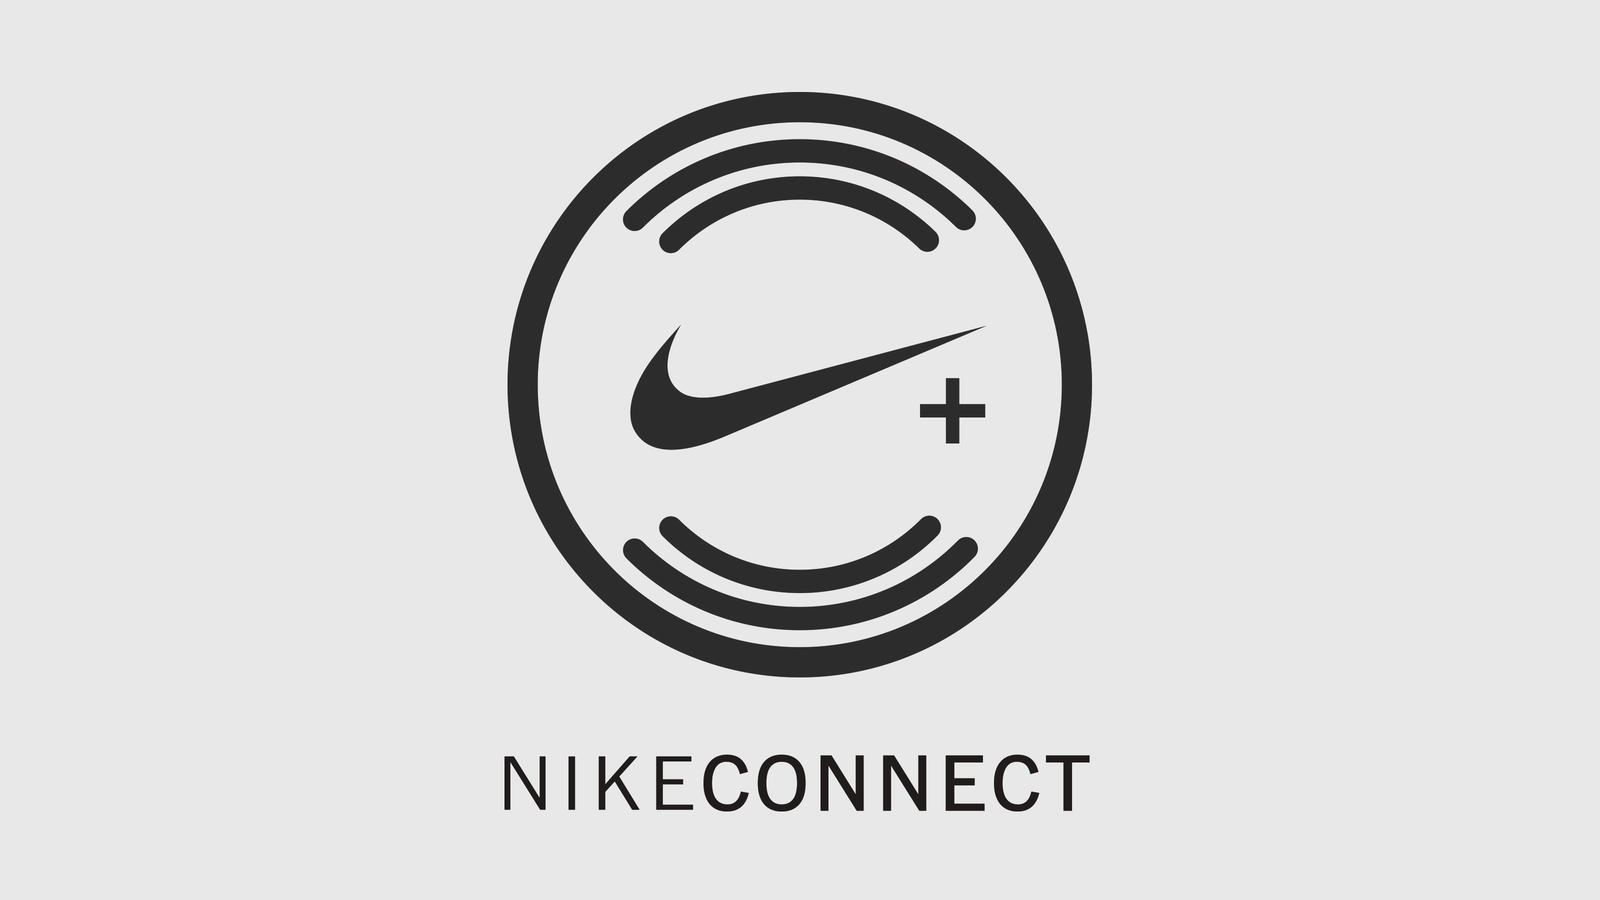 nikeconnect tag